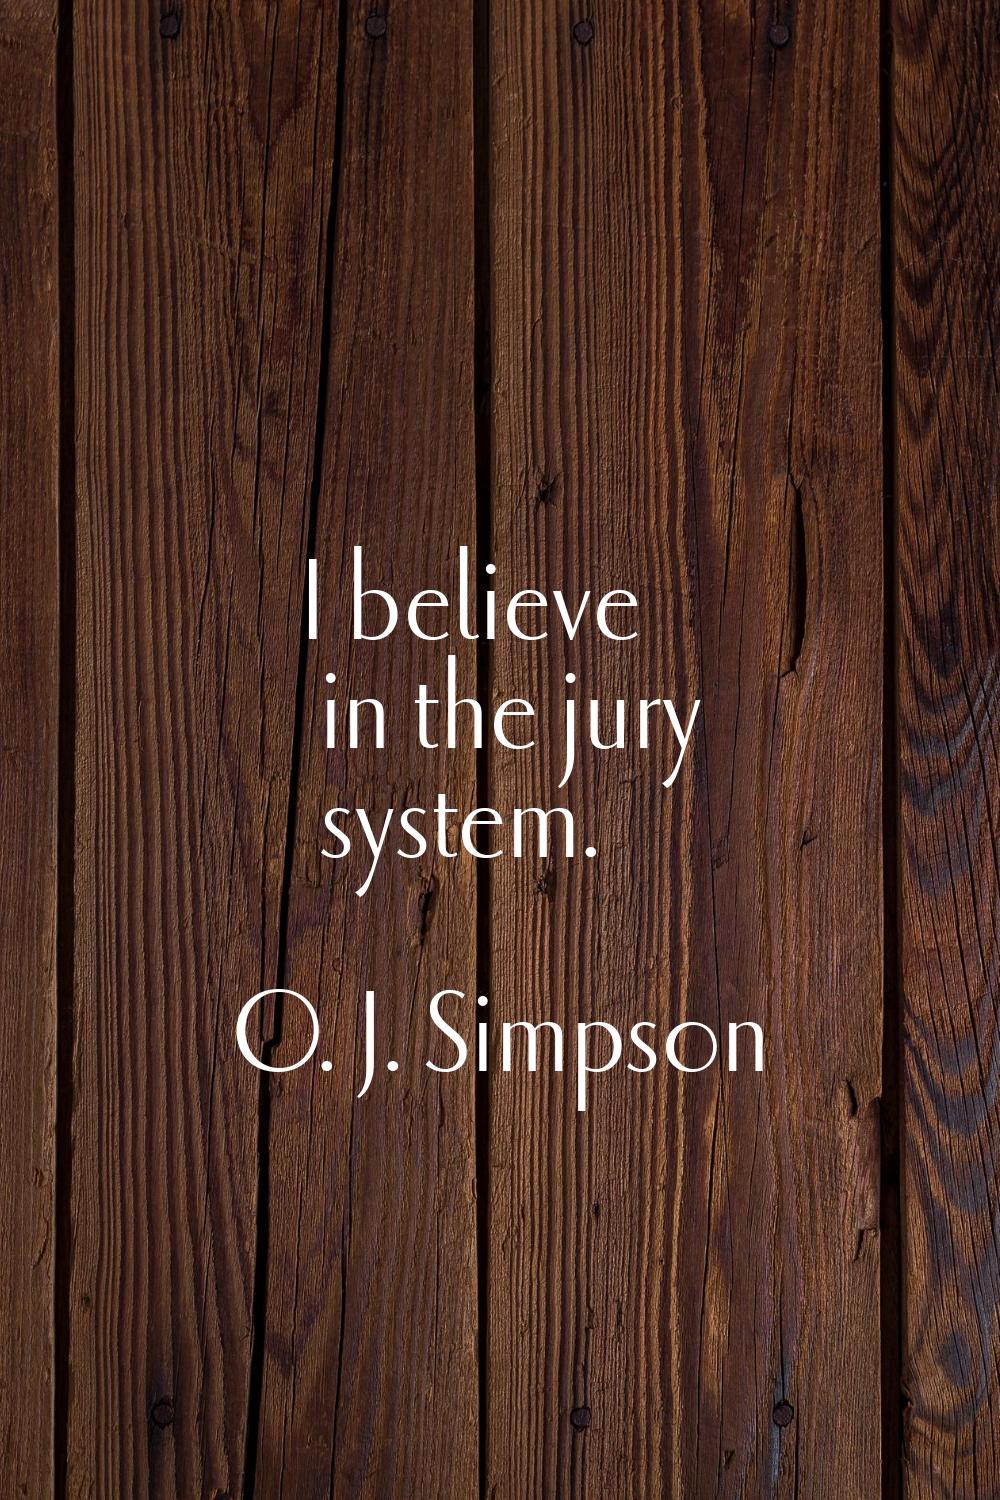 I believe in the jury system.